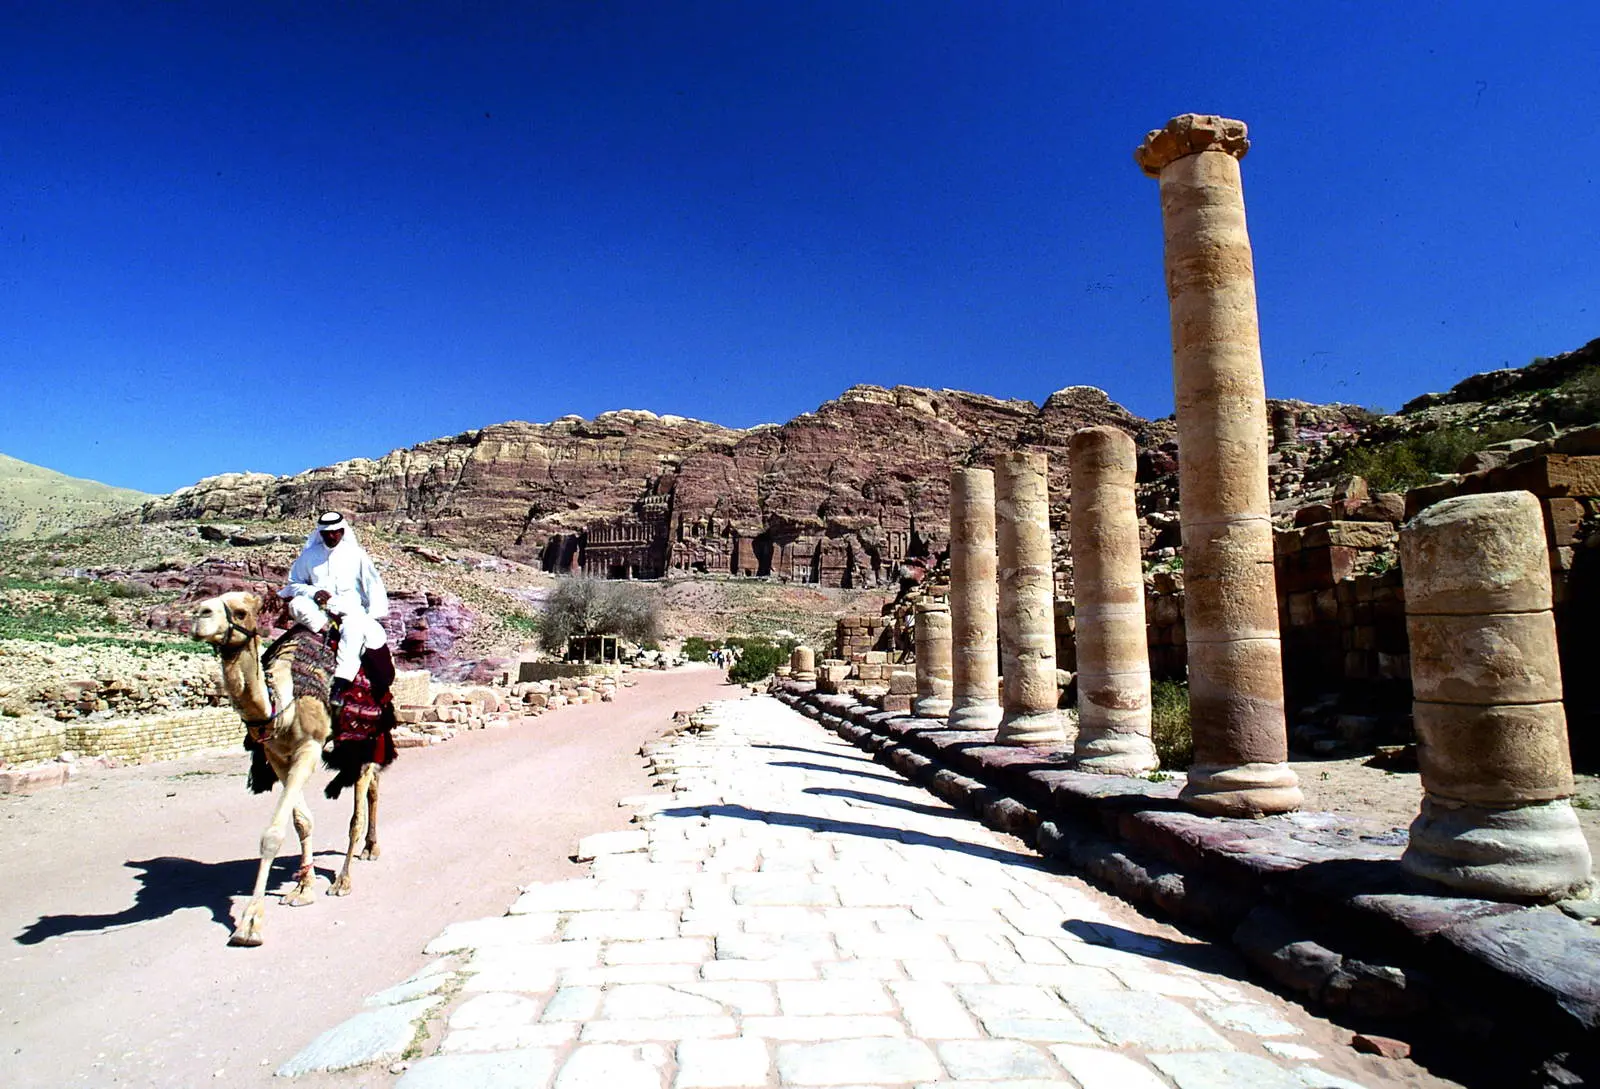 Jordan’s Tourism Sees ‘Good Year’; Expectations Higher for 2019